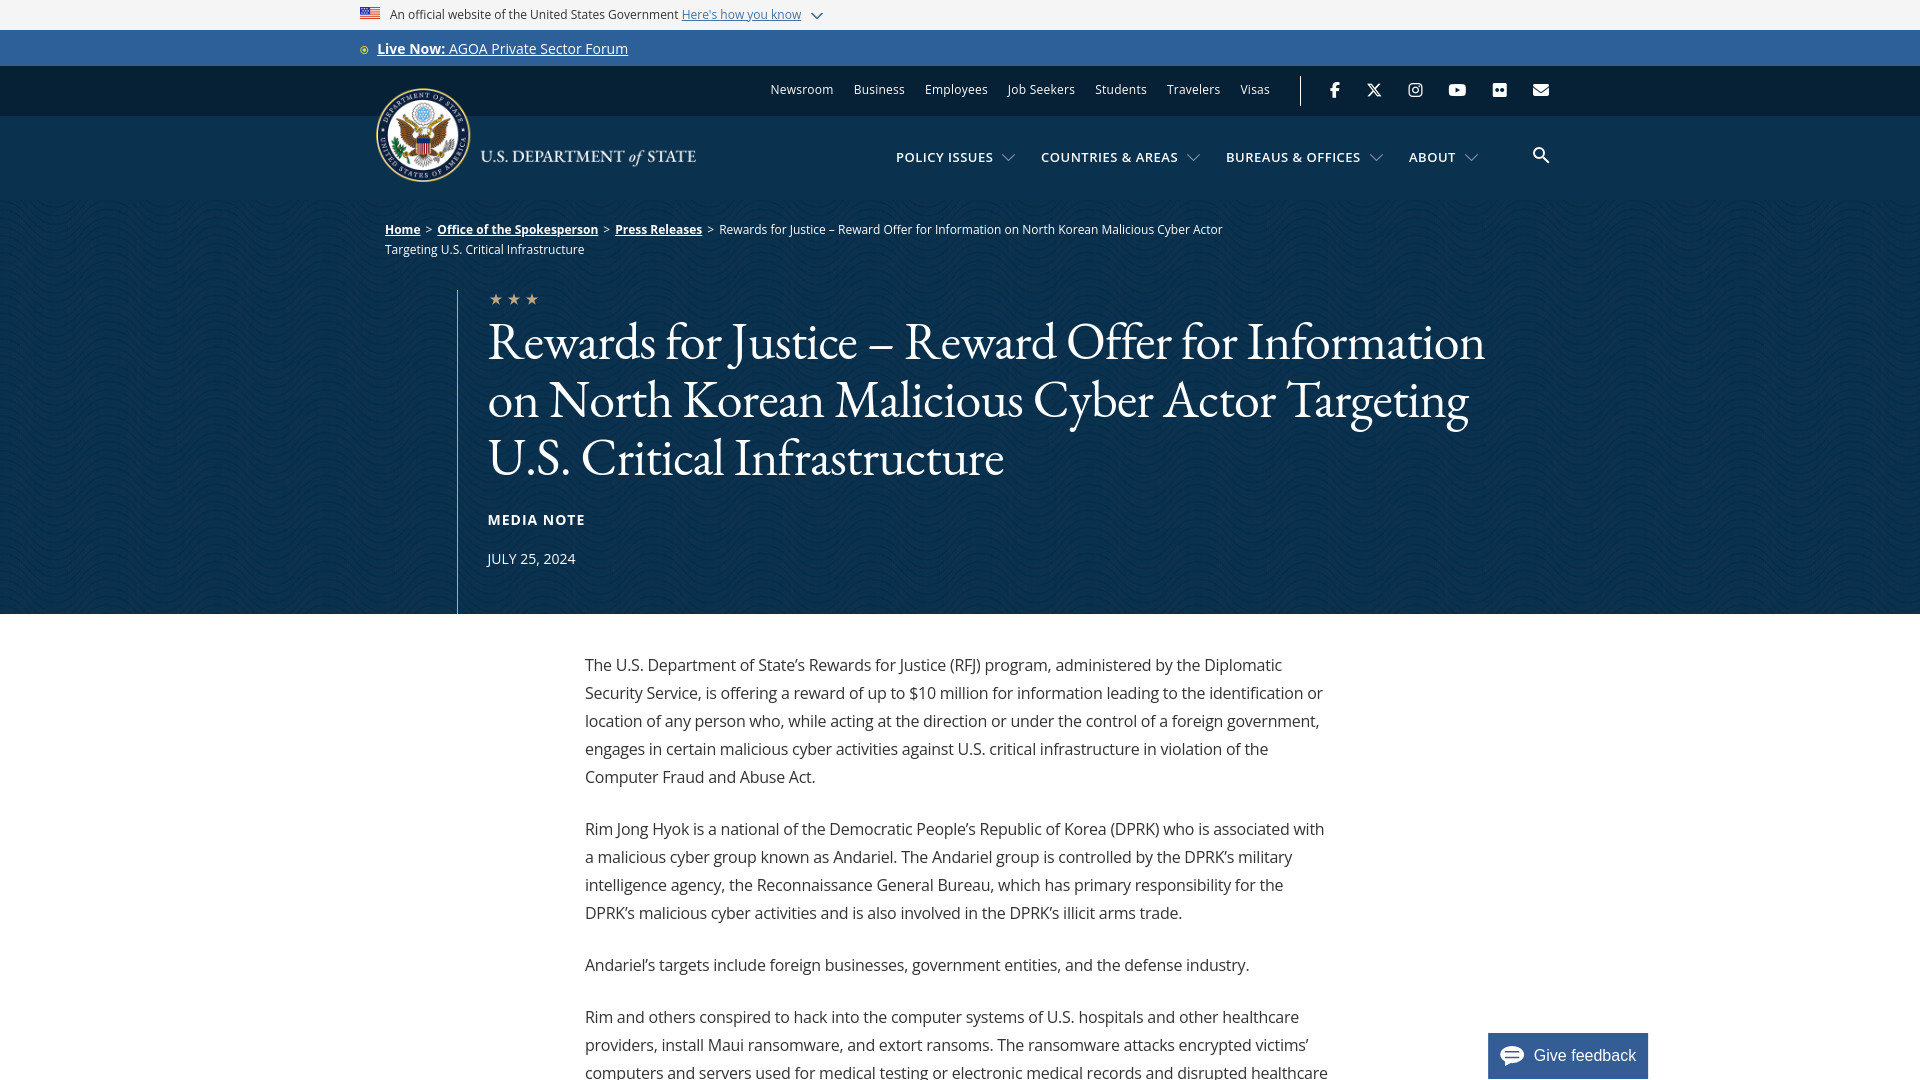 Rewards for Justice – Reward Offer for Information on North Korean Malicious Cyber Actor Targeting U.S. Critical Infrastructure - United States Department of State